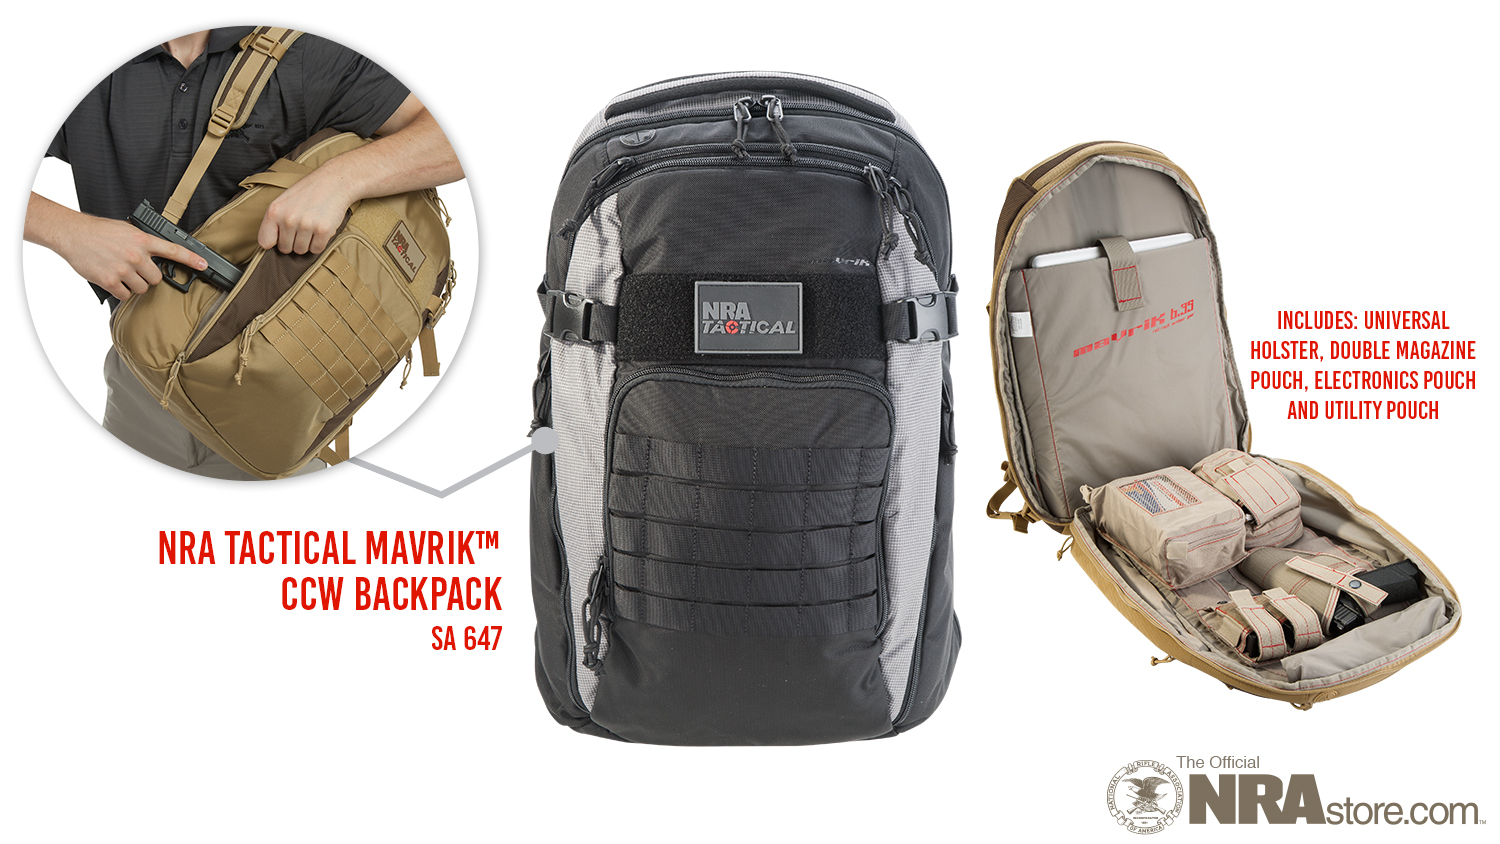 NRA Tactical mavriK Backpack Meets All Your CCW Needs